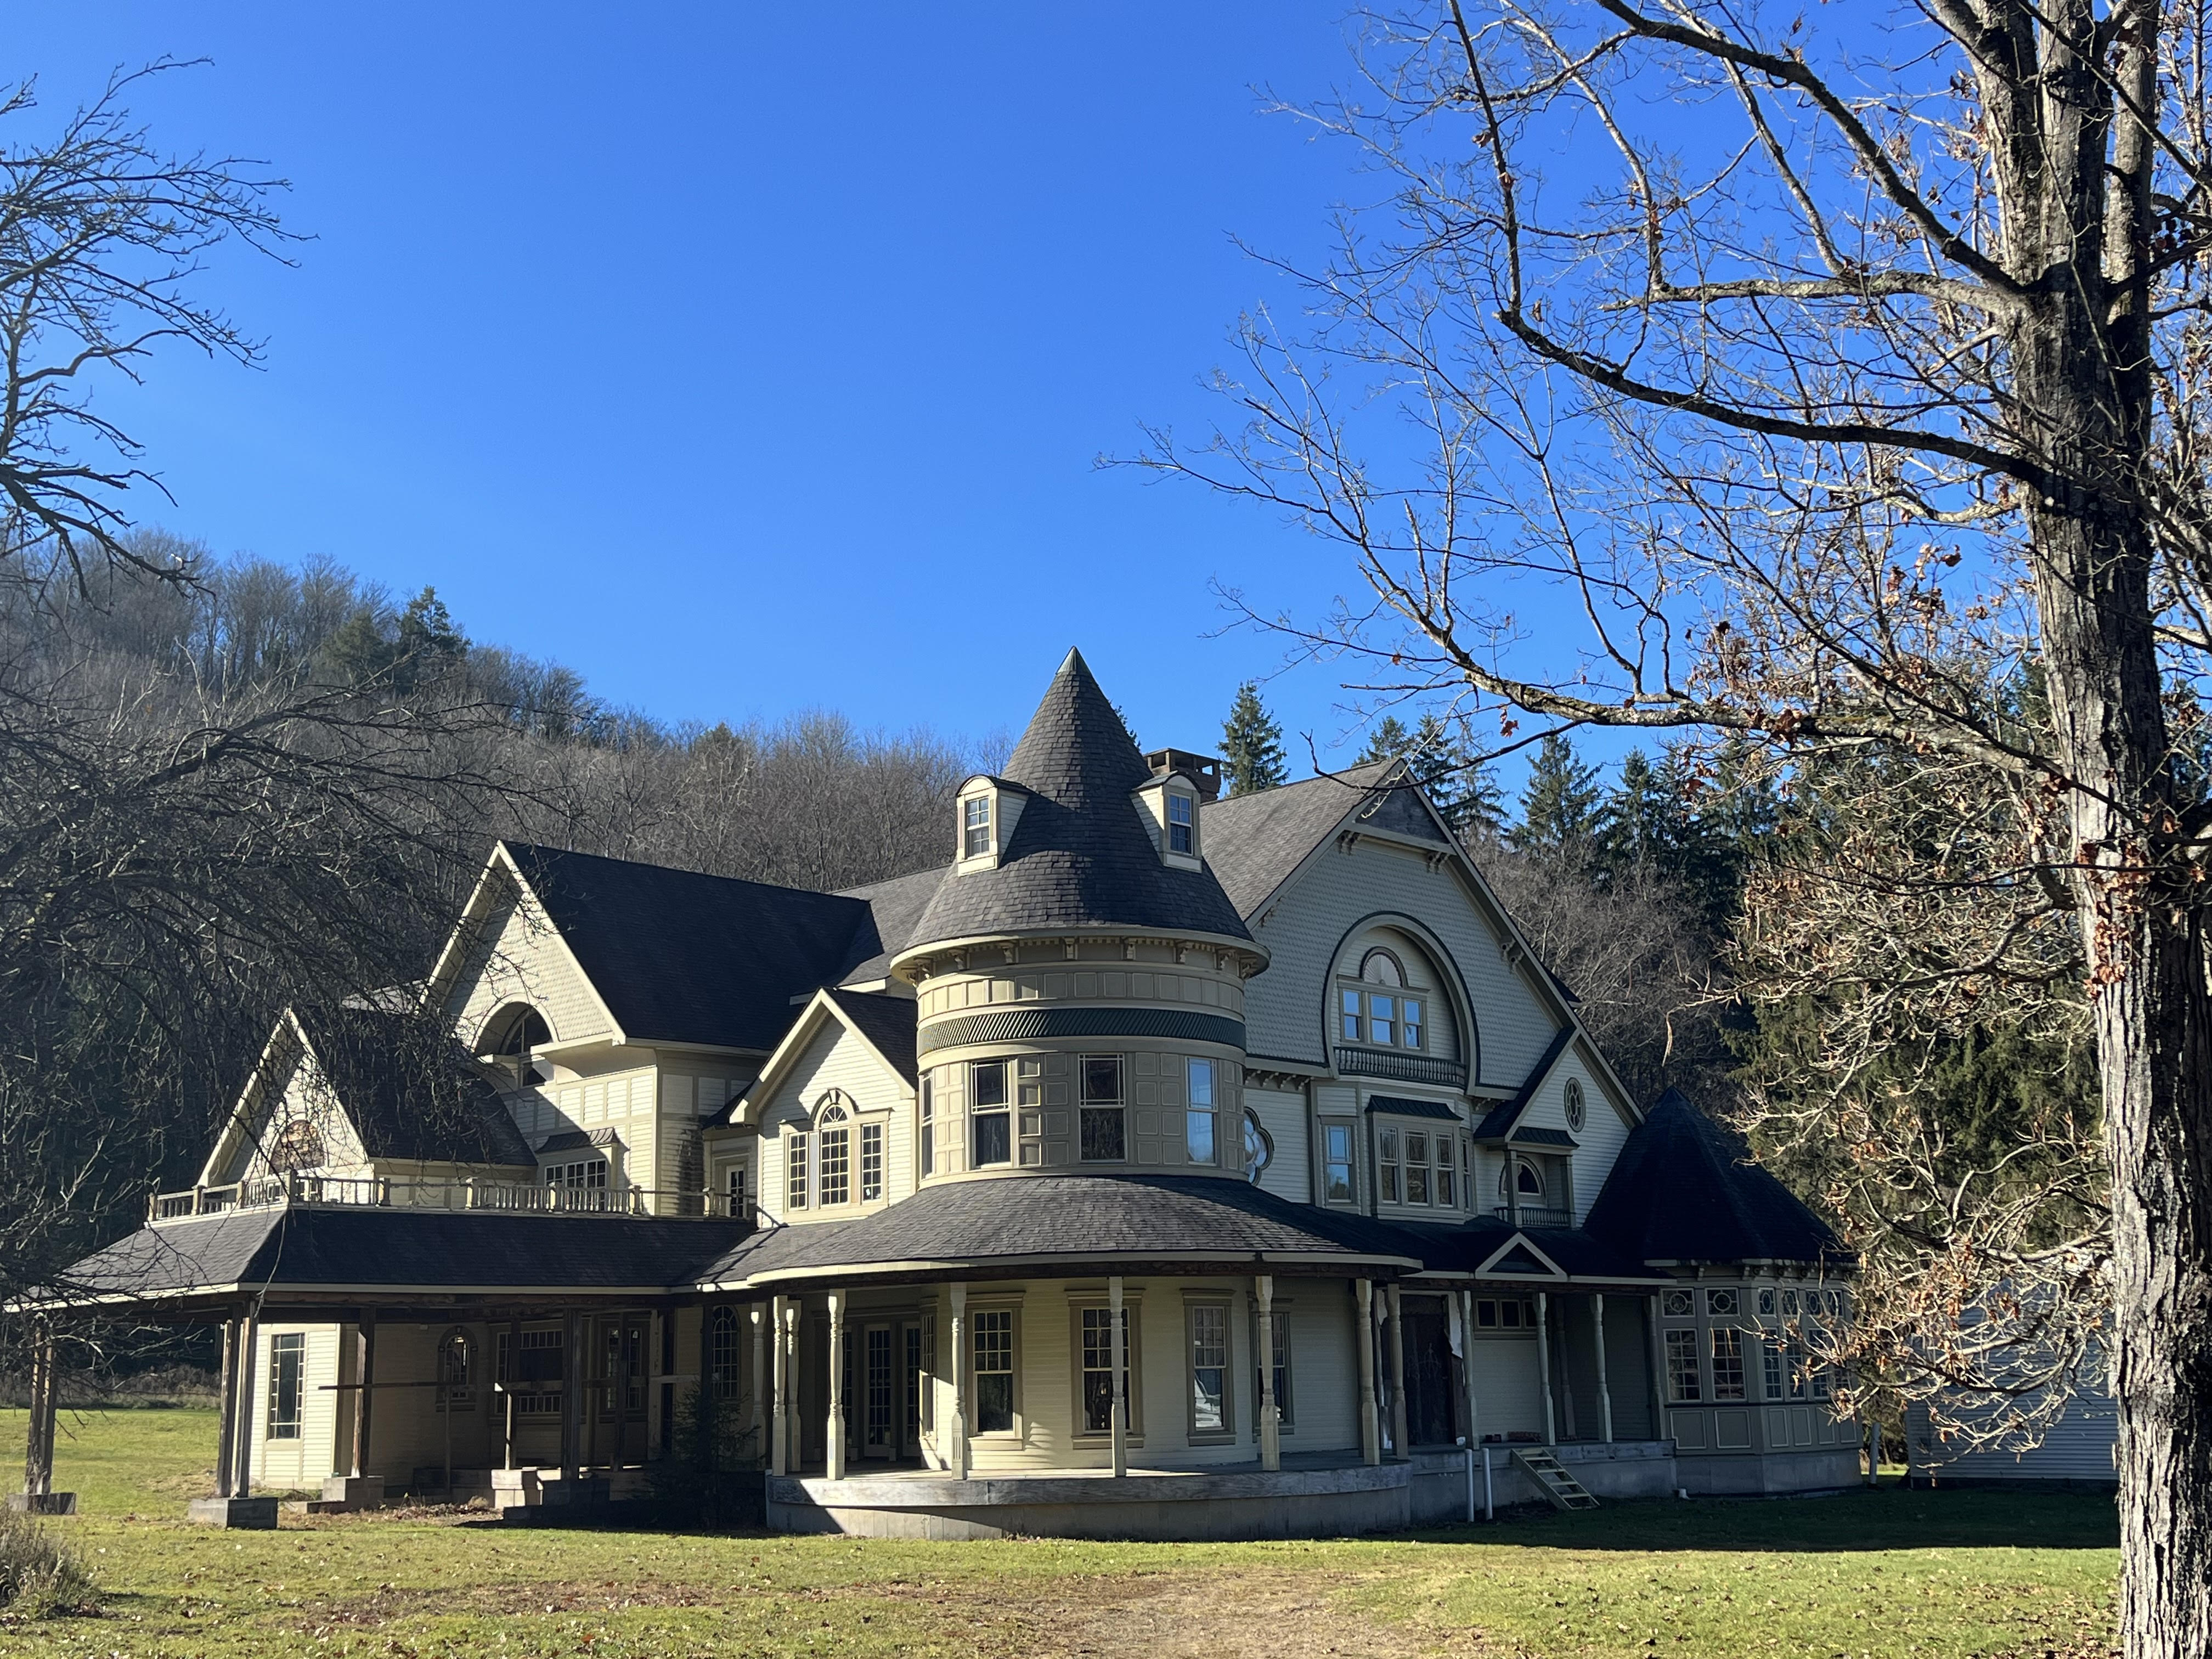 A federal investigation put construction of a rural Pennsylvania Victorian mansion on pause for 20 years